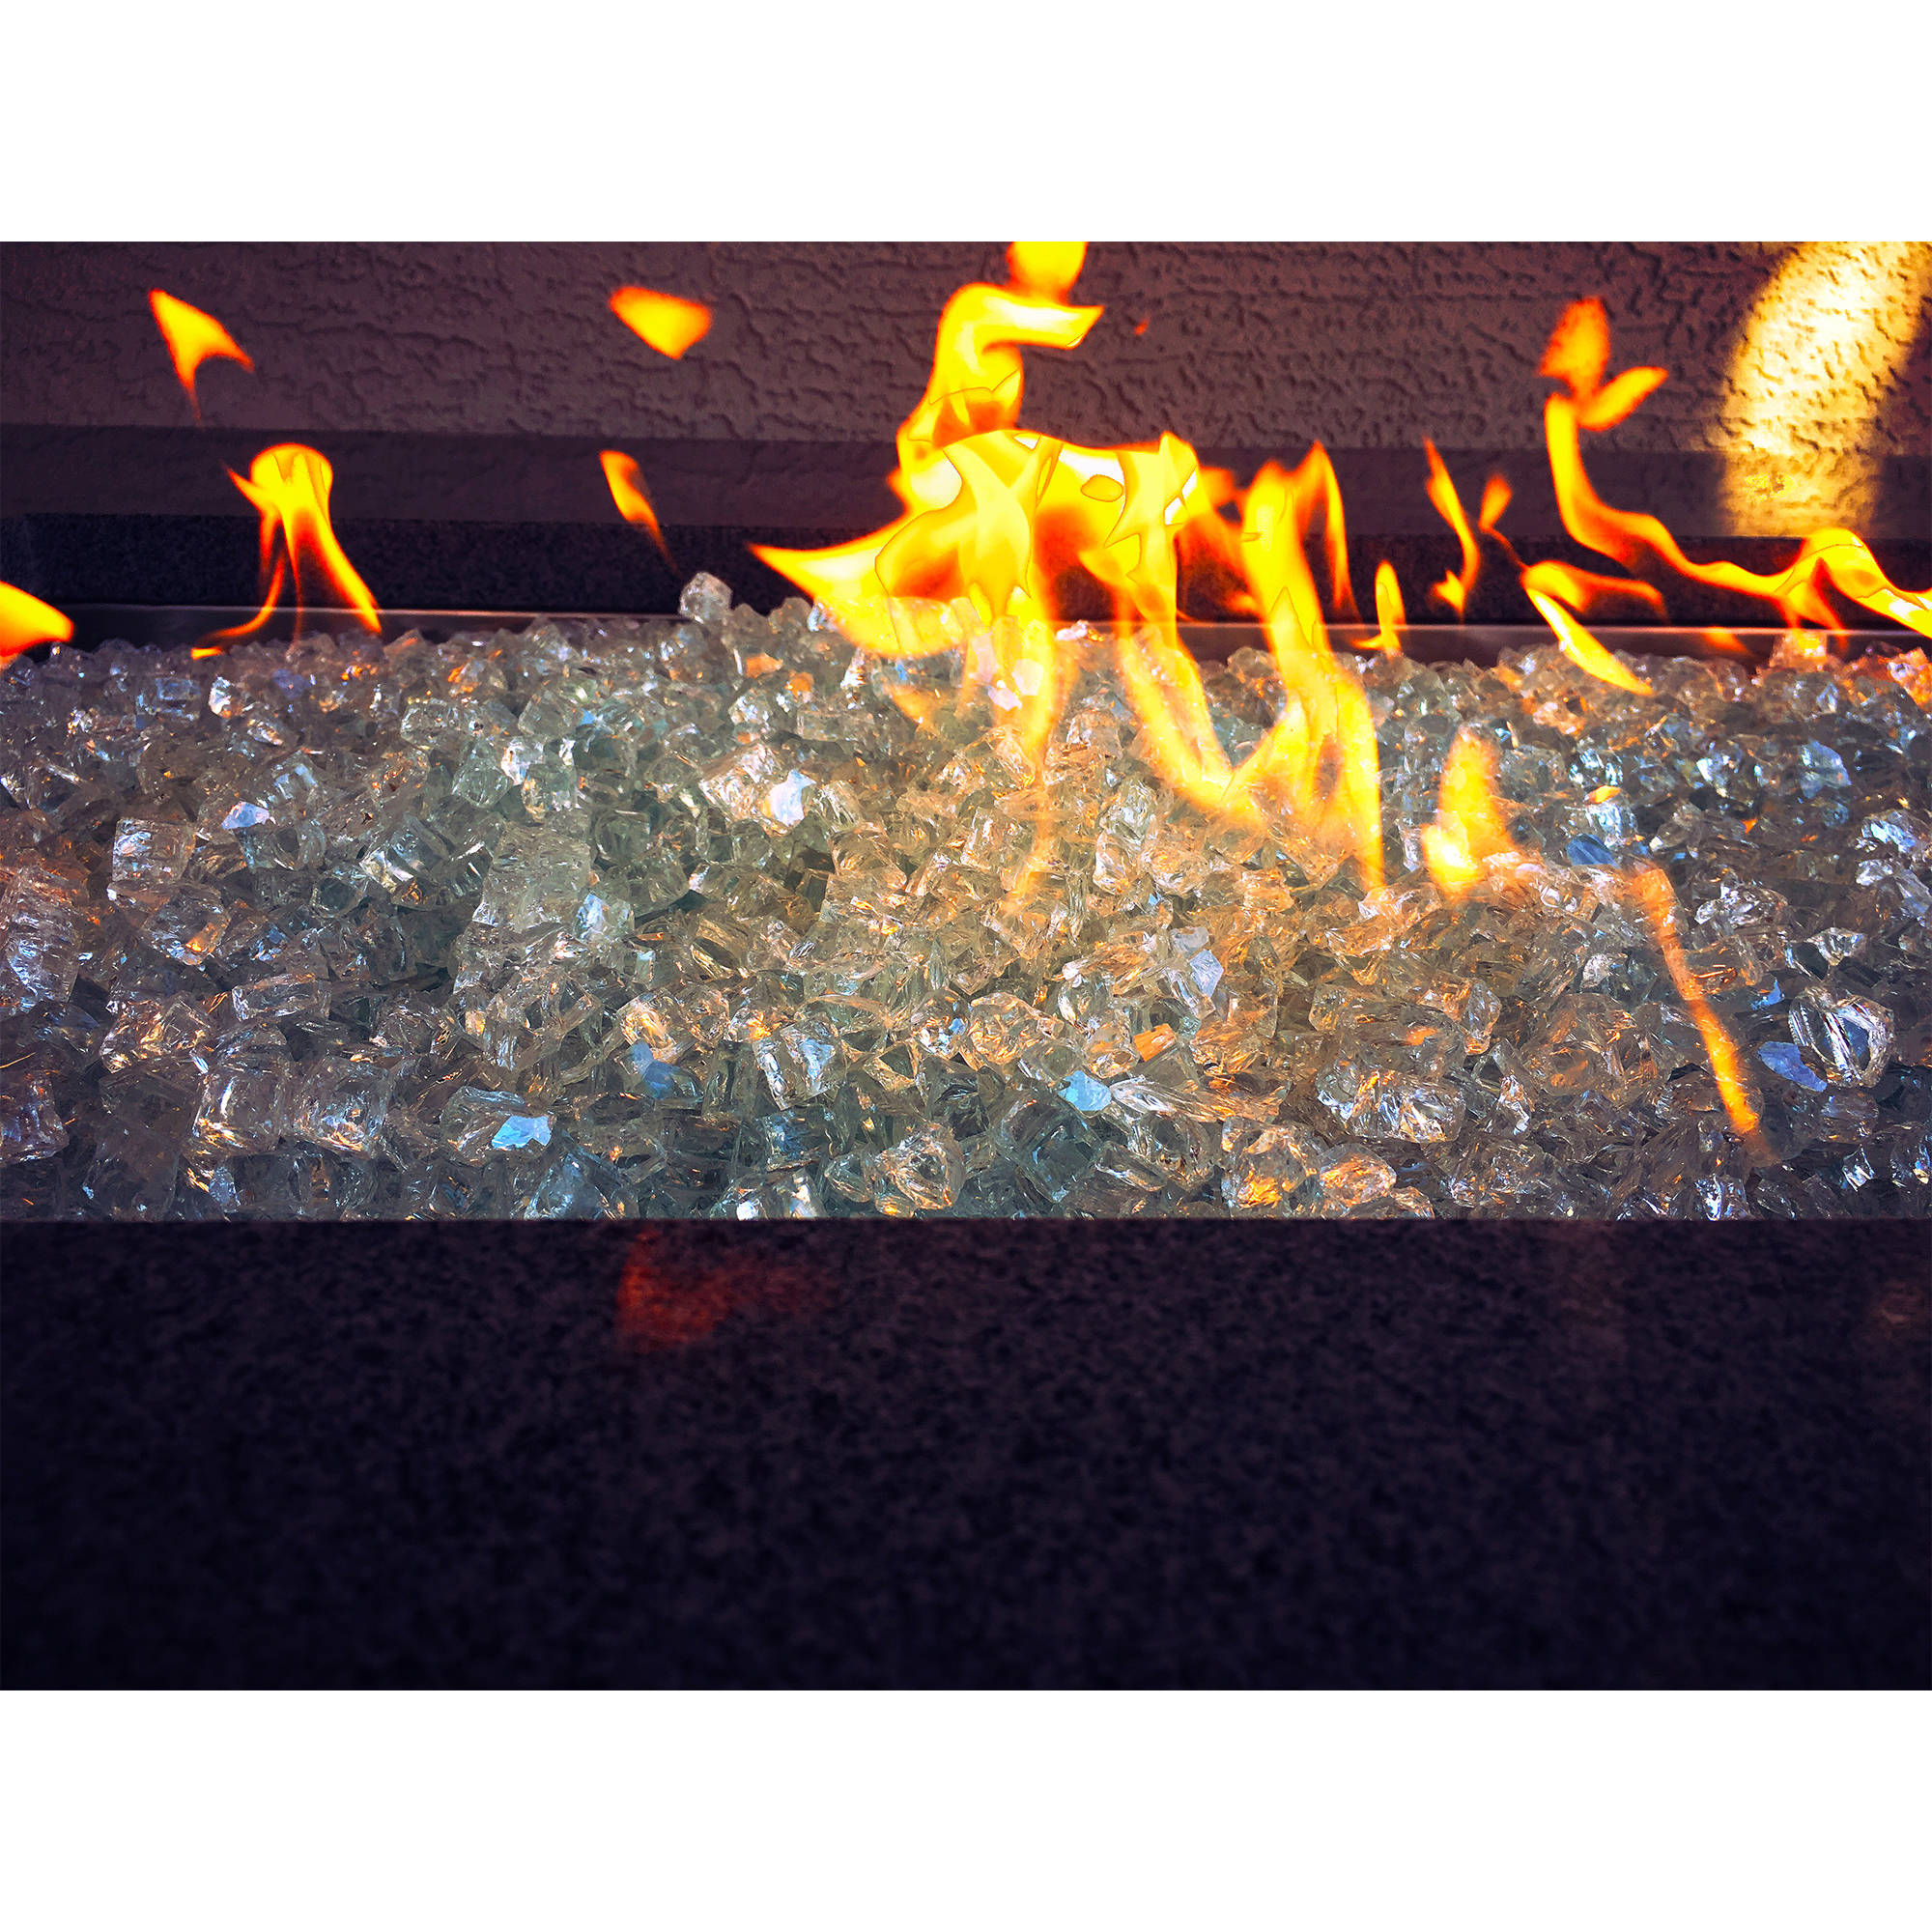 Element Aquamarine 1/2" Large Fire Pit Glass by Element Fire Glass 10lb. - image 2 of 2